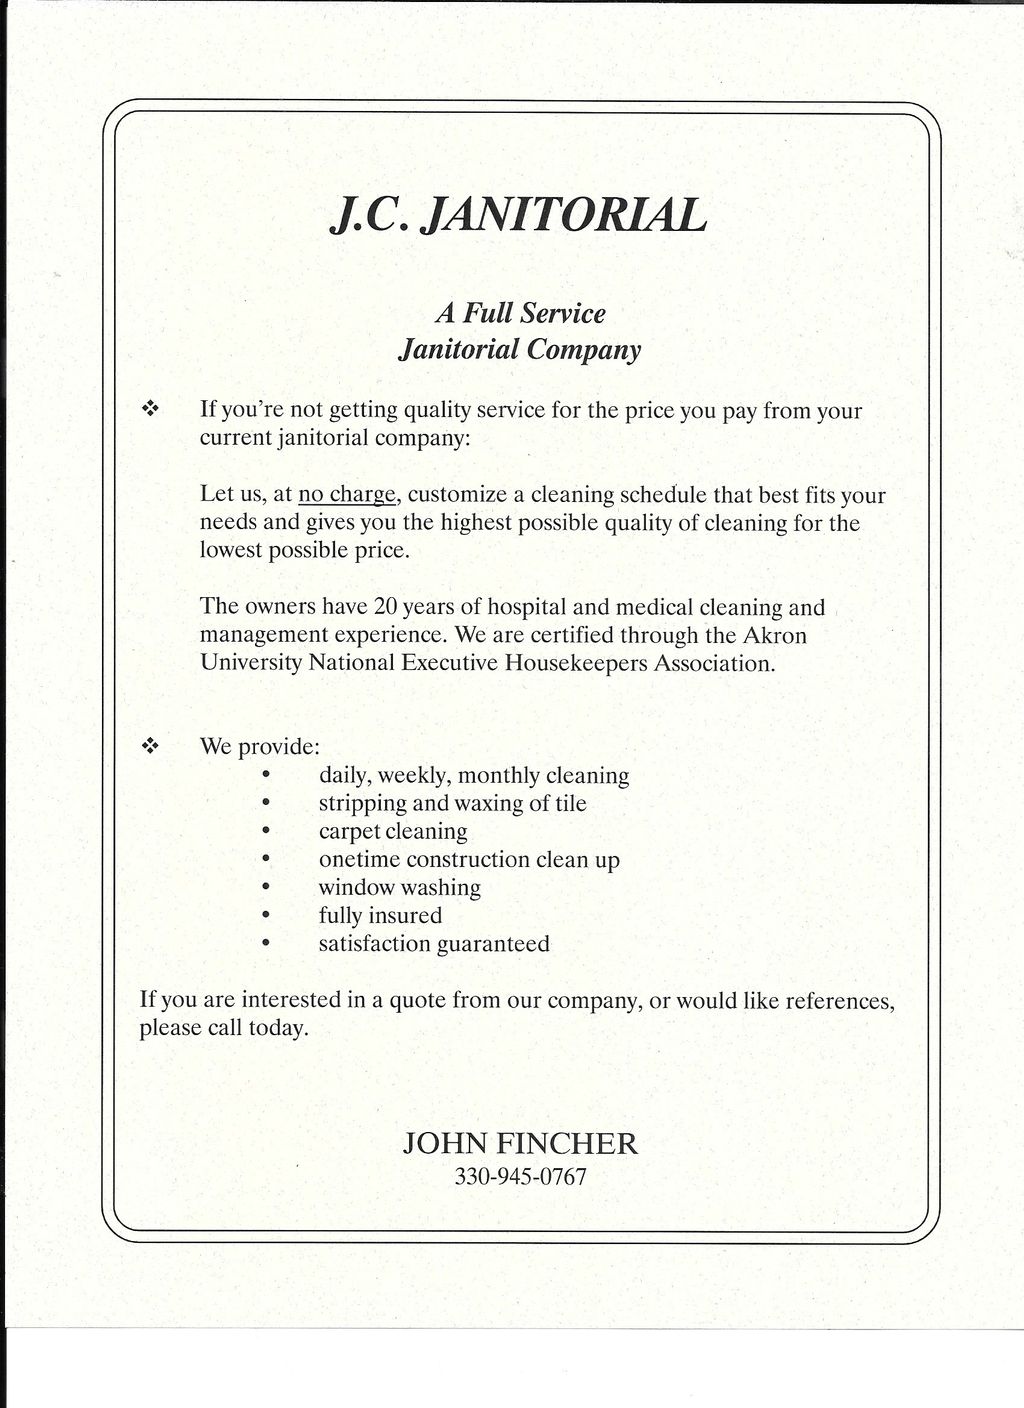 J.C. Janitorial